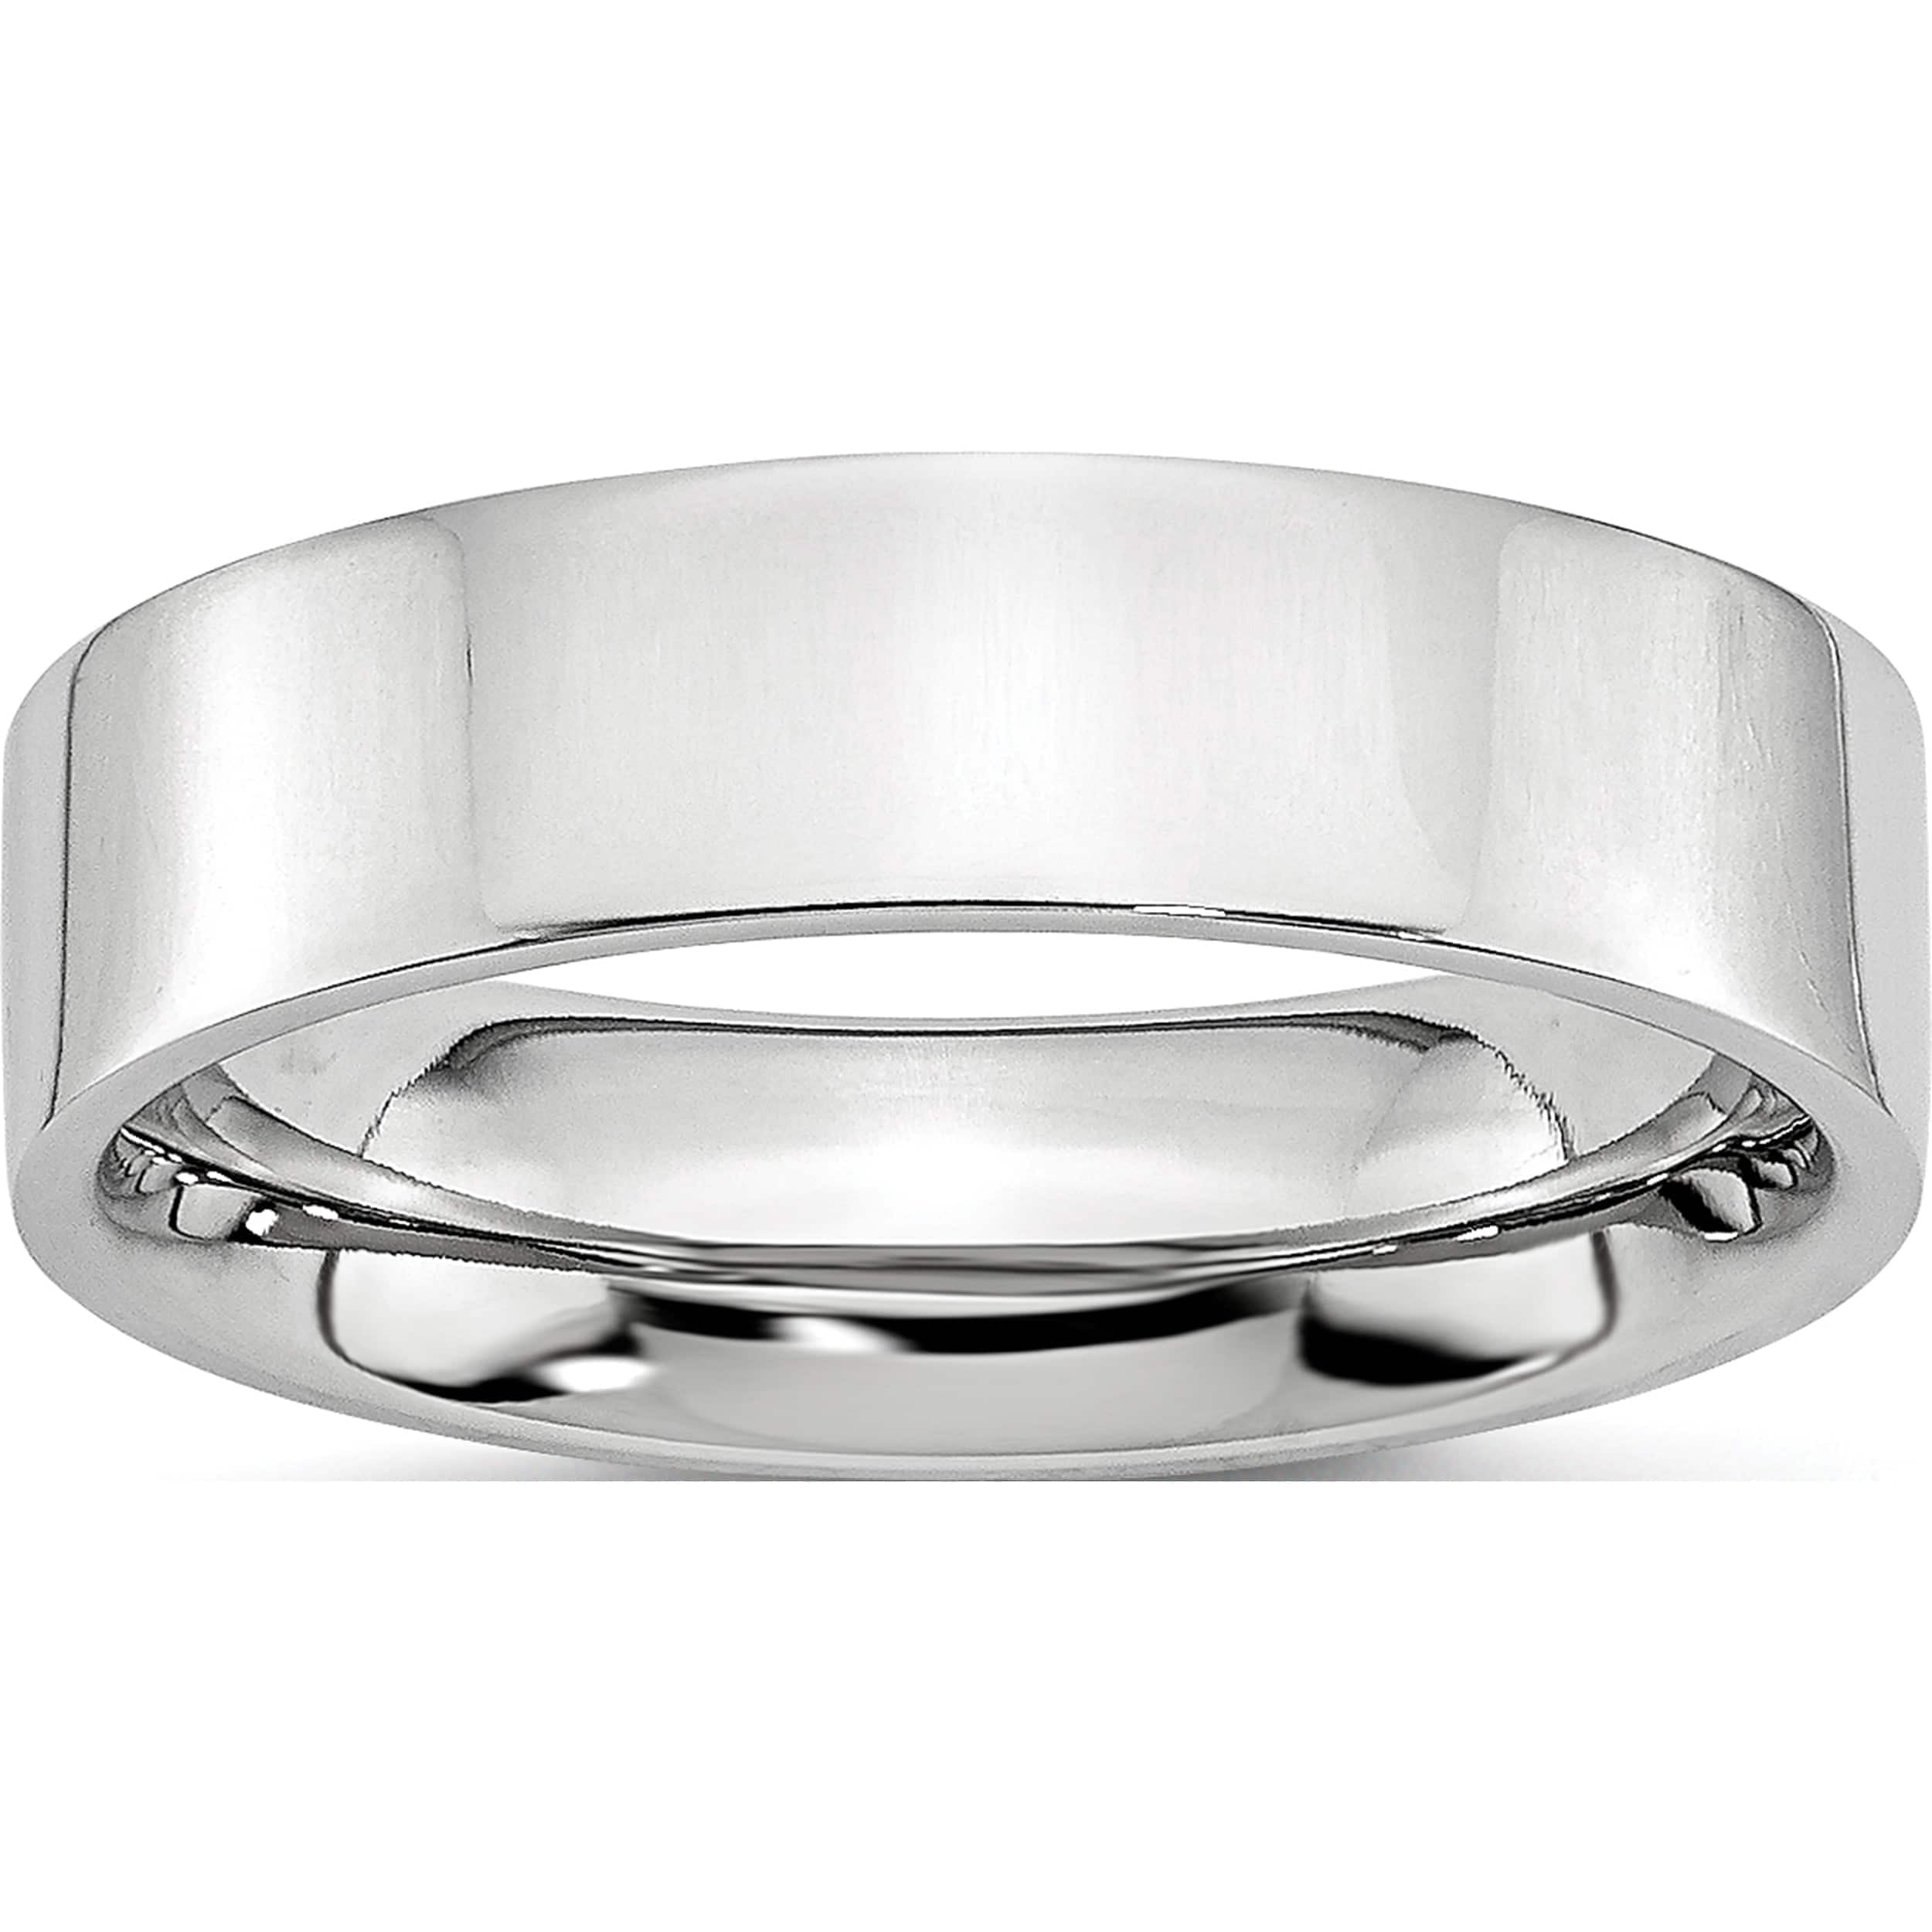 Stainless Steel Flat 6mm Polished Band Box